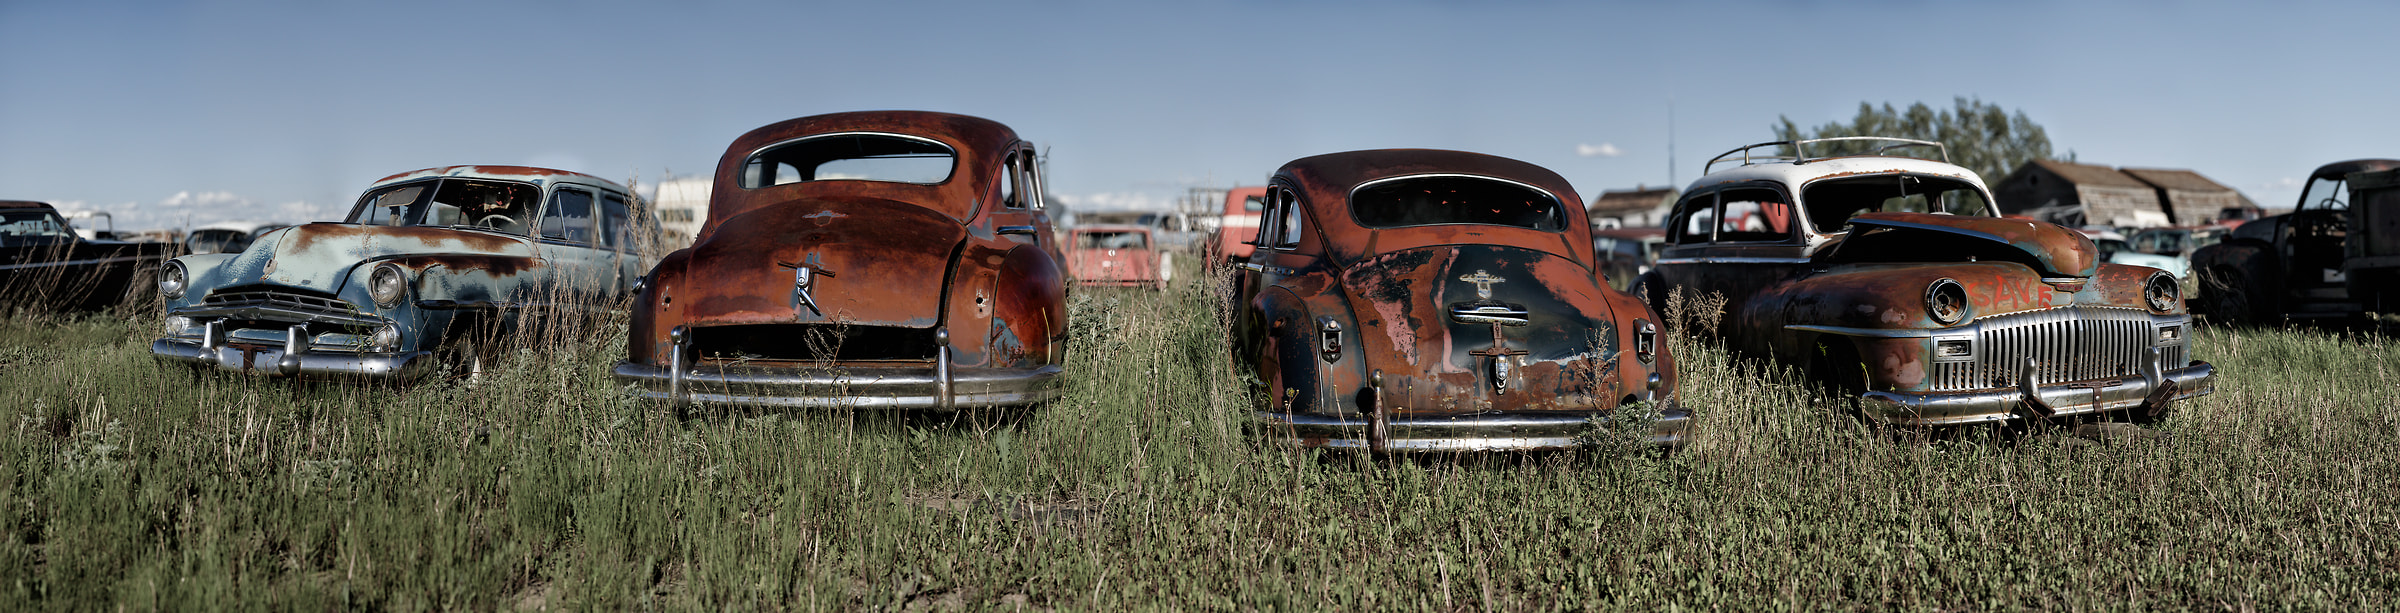 2,880 megapixels! A very high resolution, large-format VAST photo print of abandoned cars in a junkyard; photograph created by Scott Dimond.